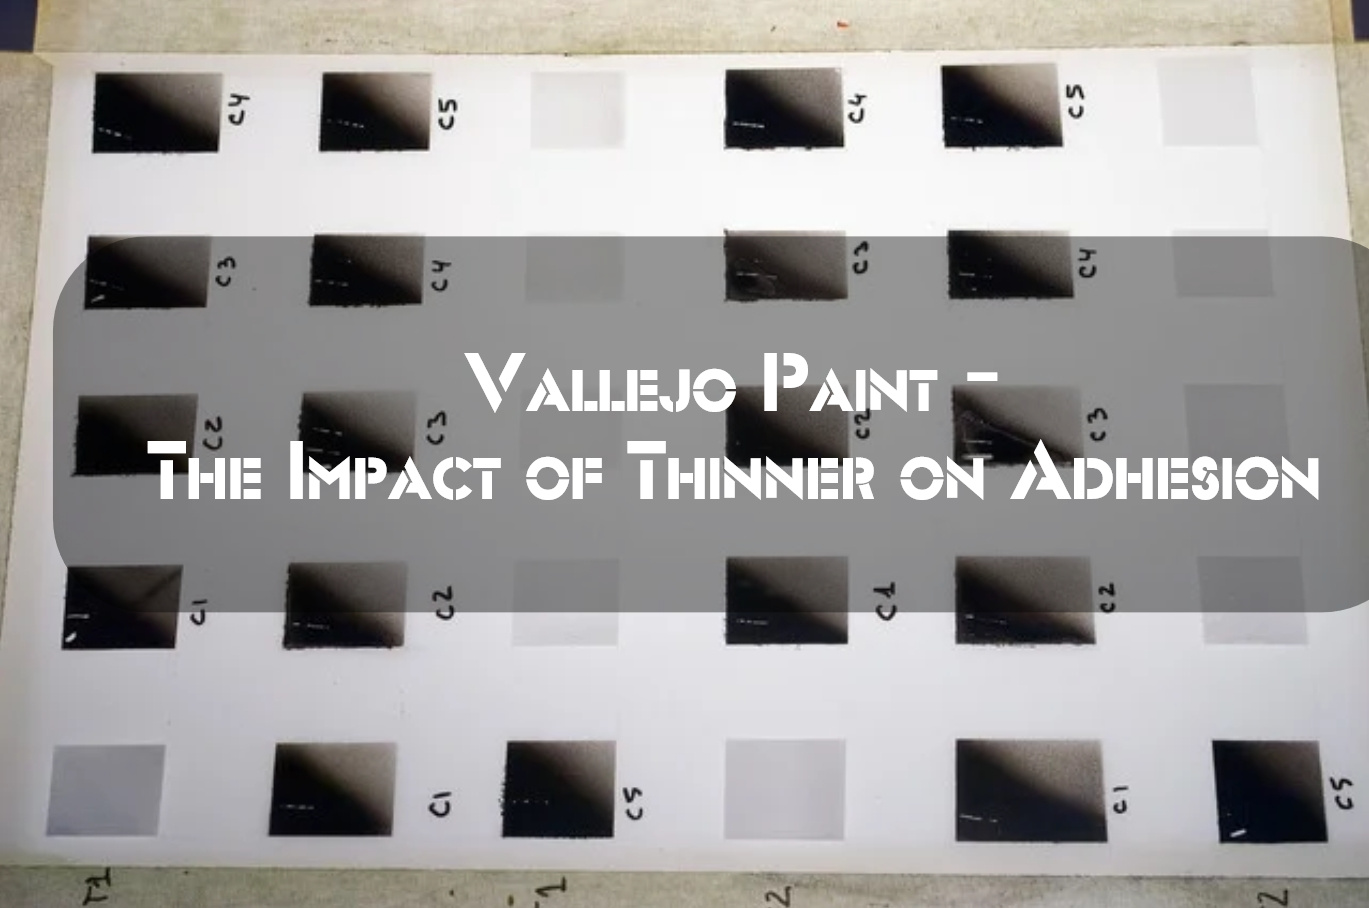 Vallejo Paint – The Impact of Thinner on Adhesion